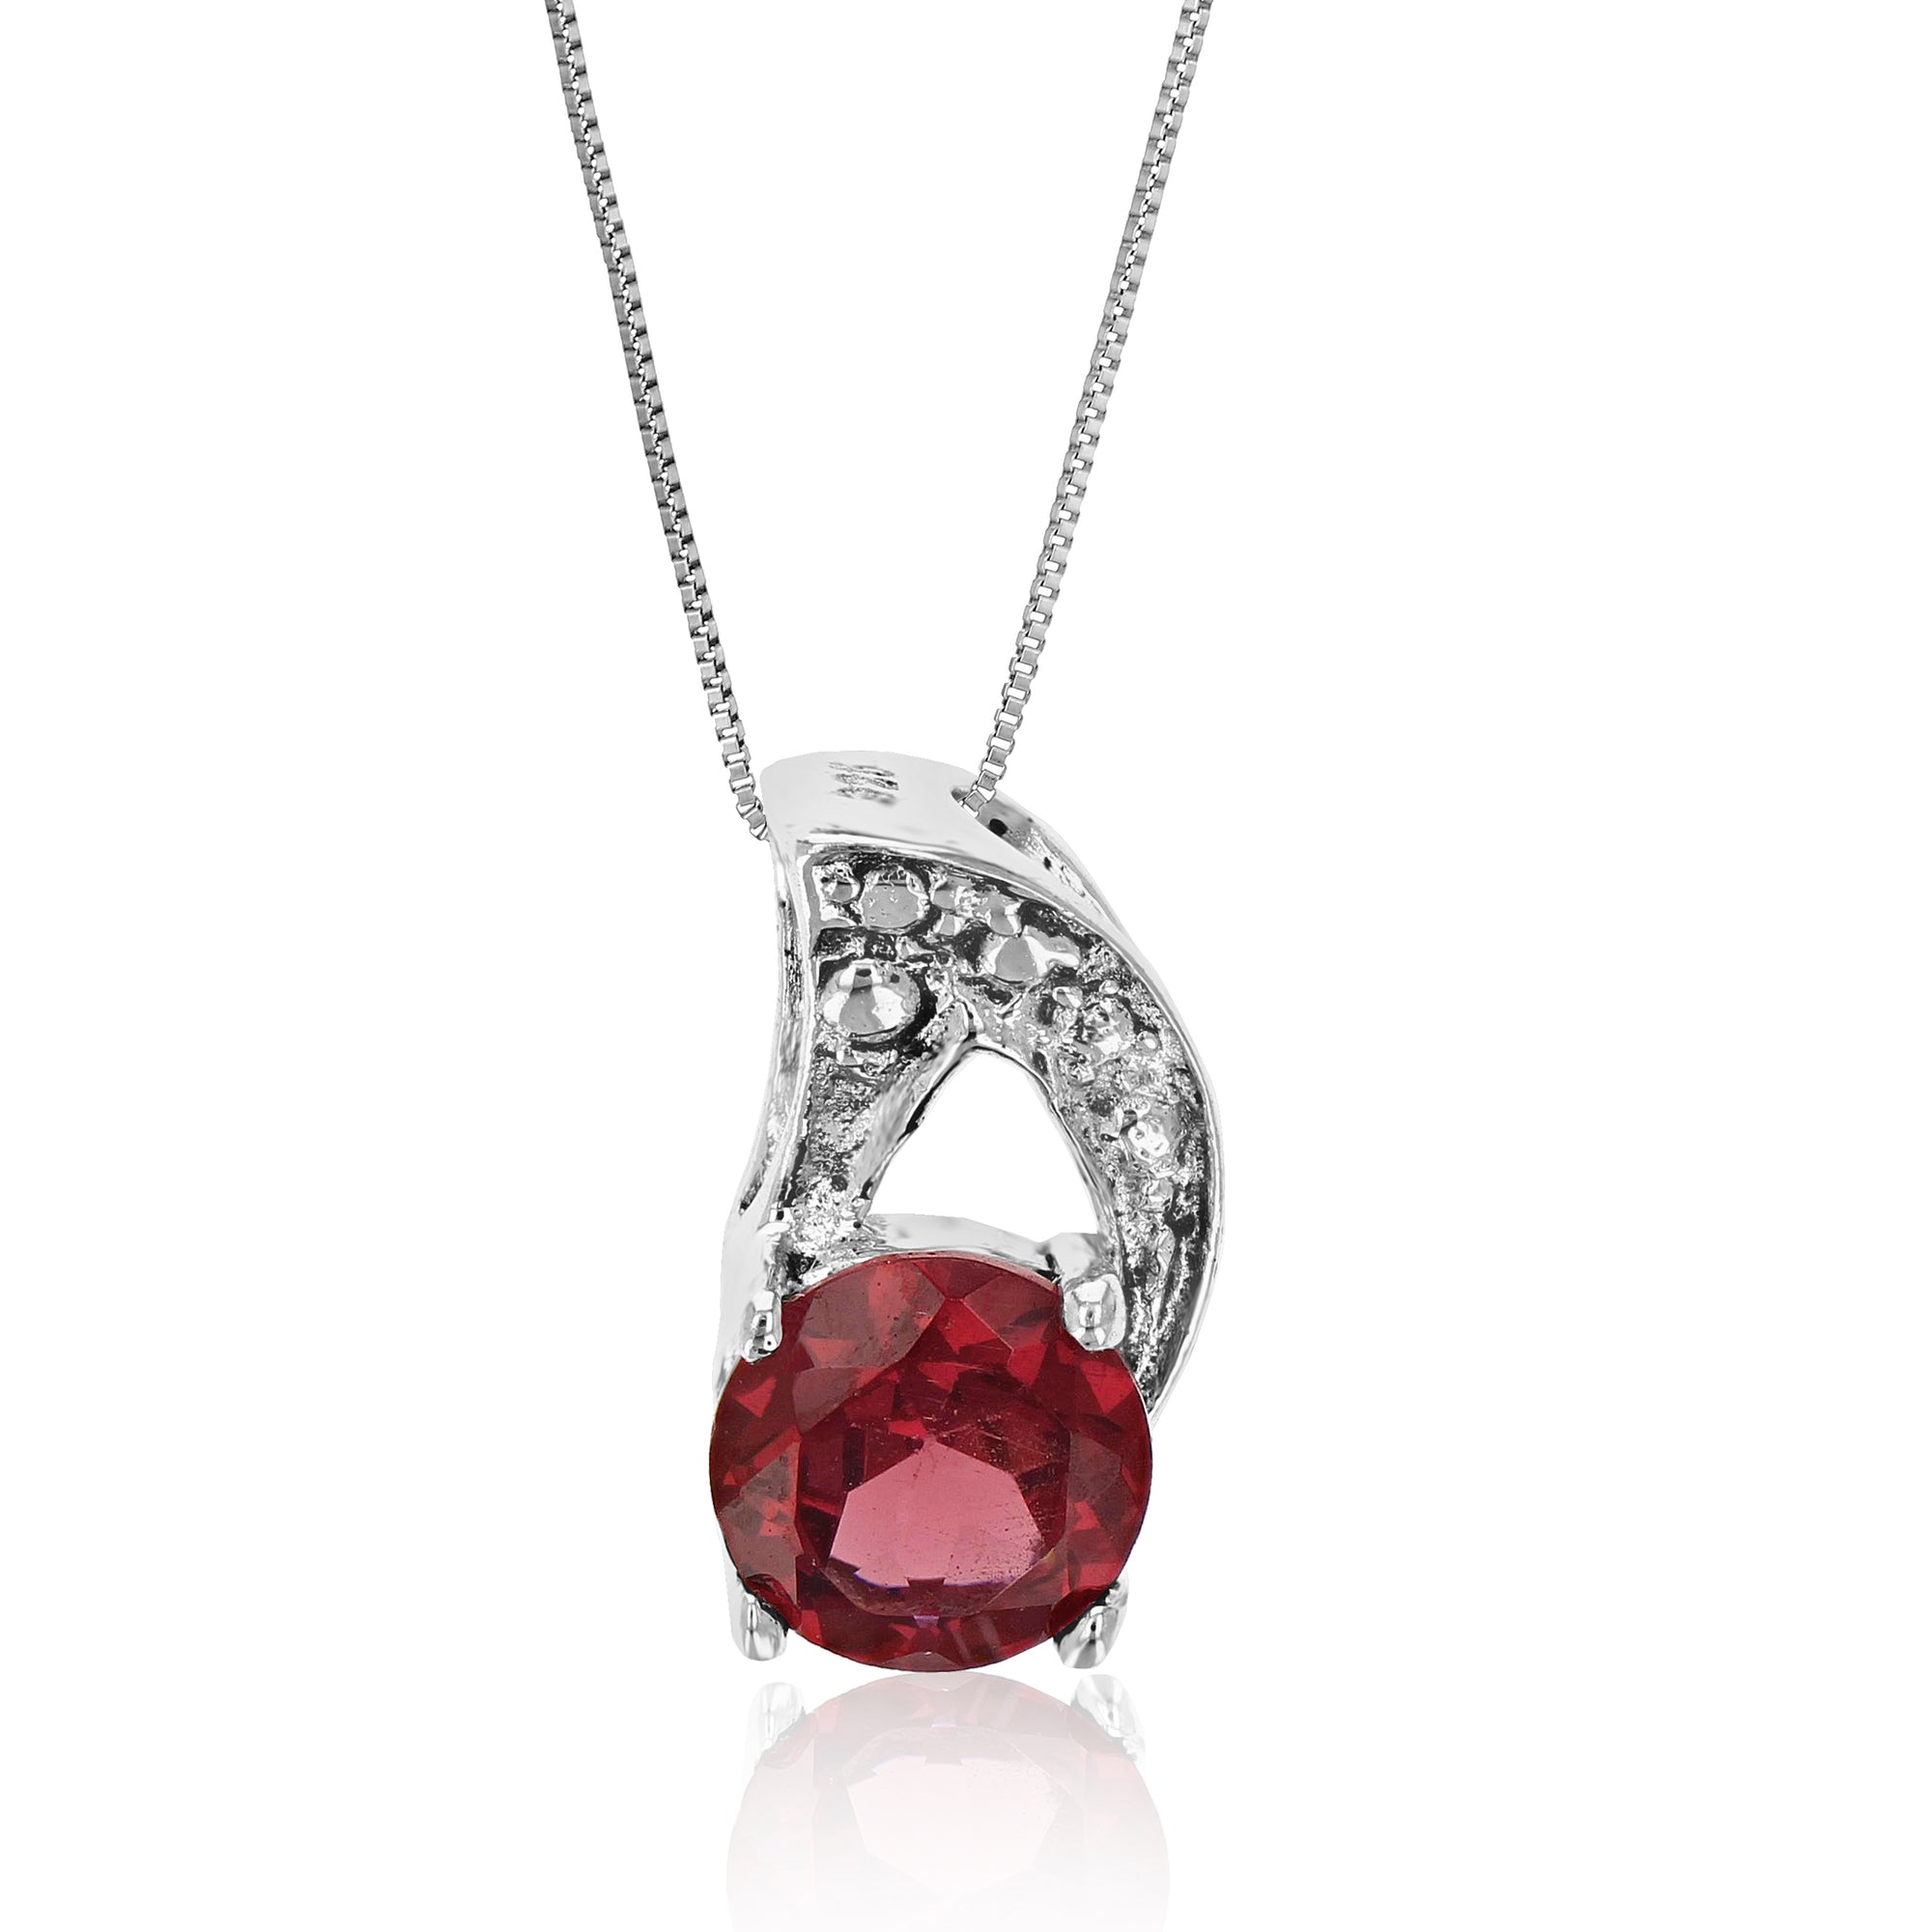 1/2 cttw Pendant Necklace, Garnet Pendant Necklace for Women in .925 Sterling Silver with Rhodium, 18 Inch Chain, Prong Setting